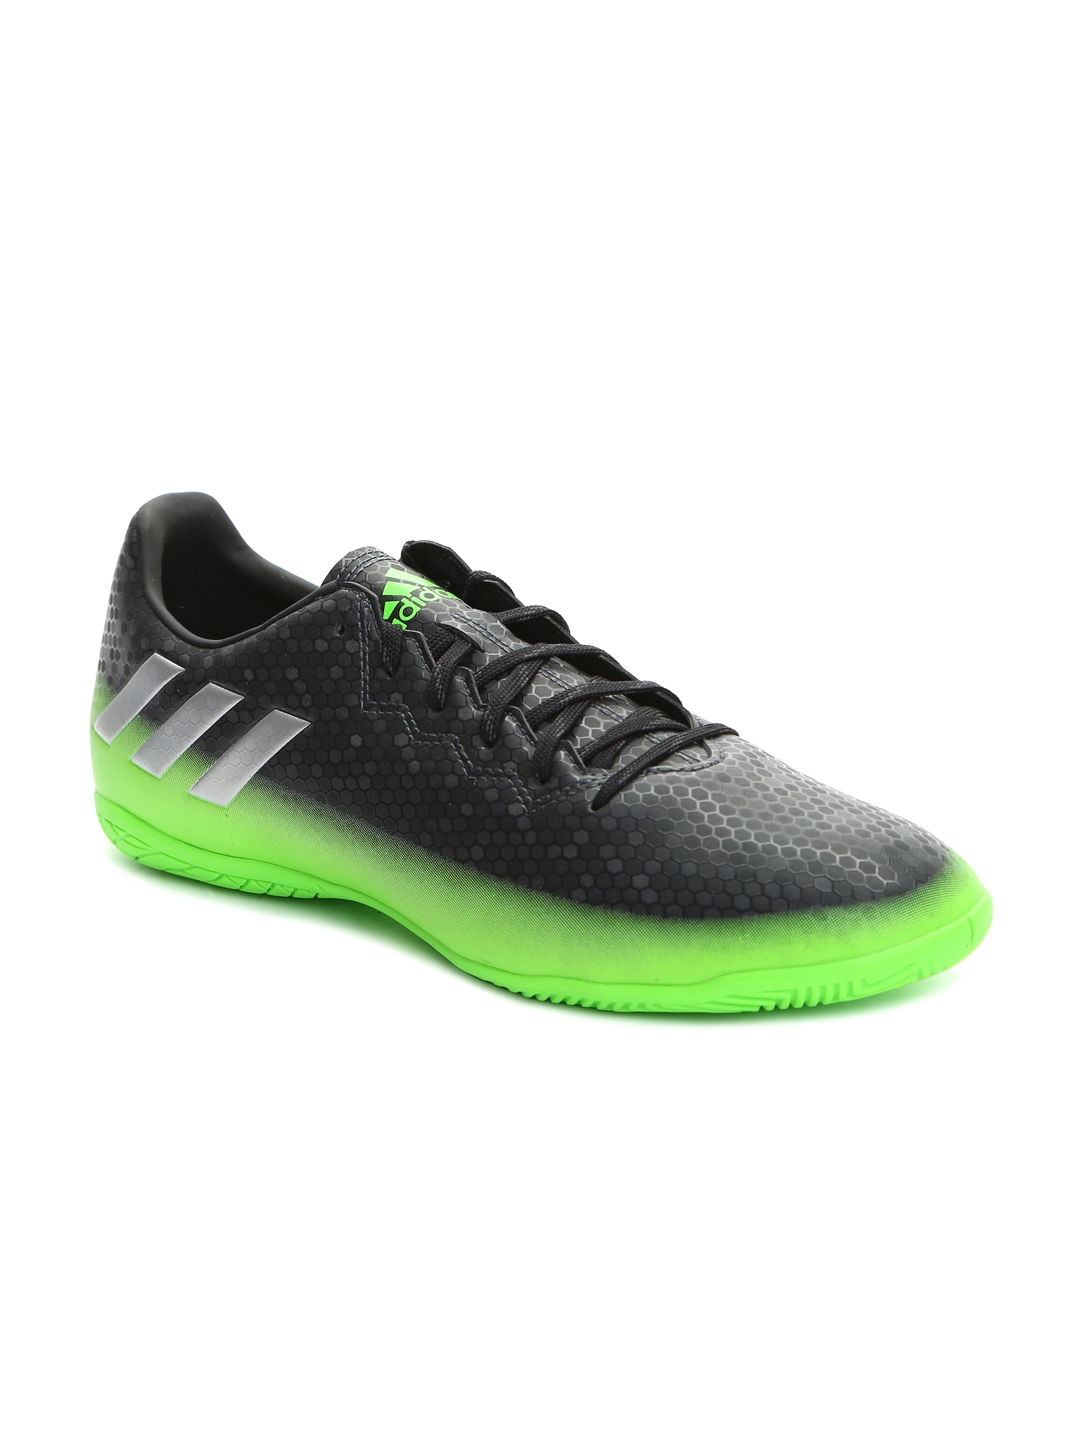 Buy ADIDAS Black & Green Printed Messi 16.4 Football Shoes - Sports Shoes for Men 1501508 | Myntra